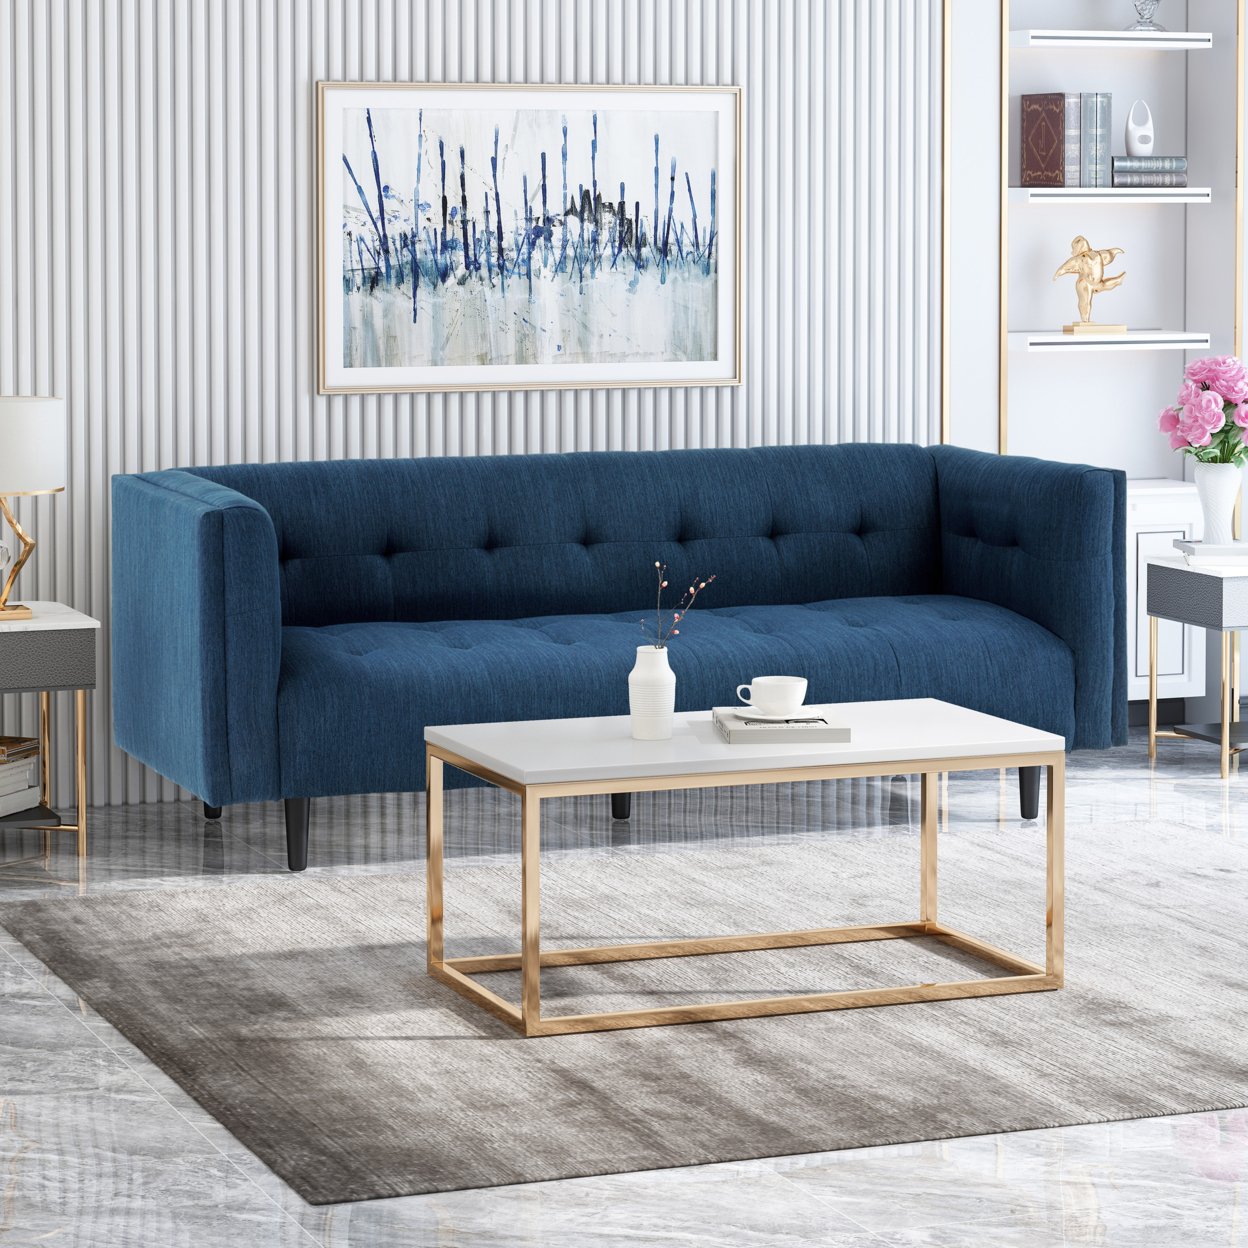 Plano Mid-Century Modern Fabric Upholstered Tufted 3 Seater Sofa - Navy Blue + Dark Brown